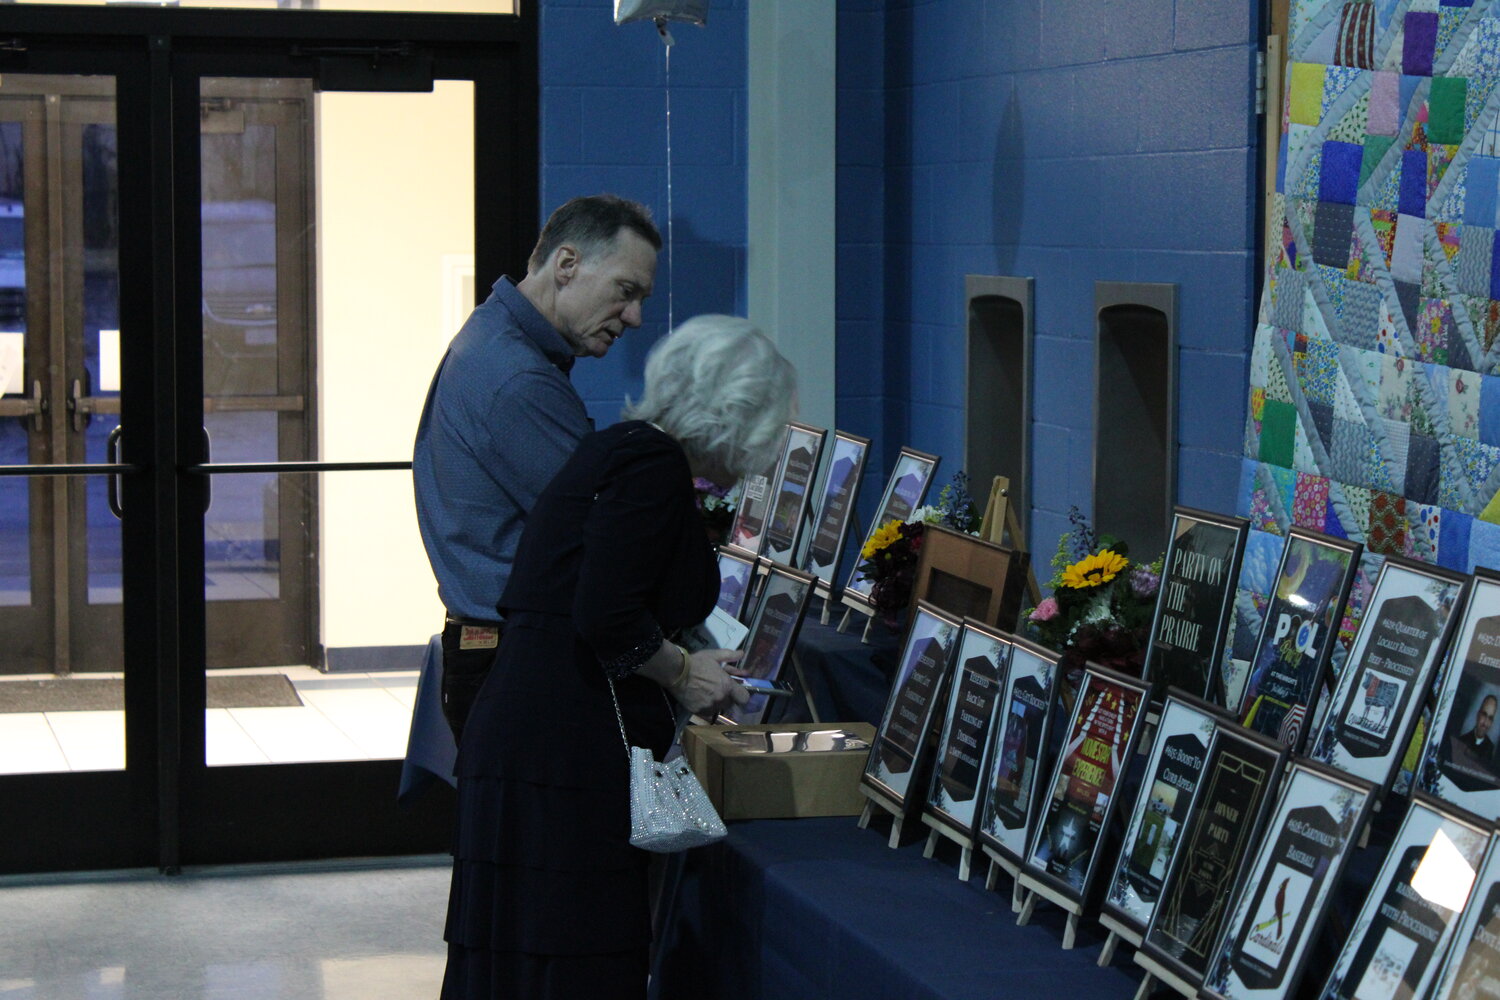 Principal Mary Wooley checks out the items up for auction before the dinner begins.